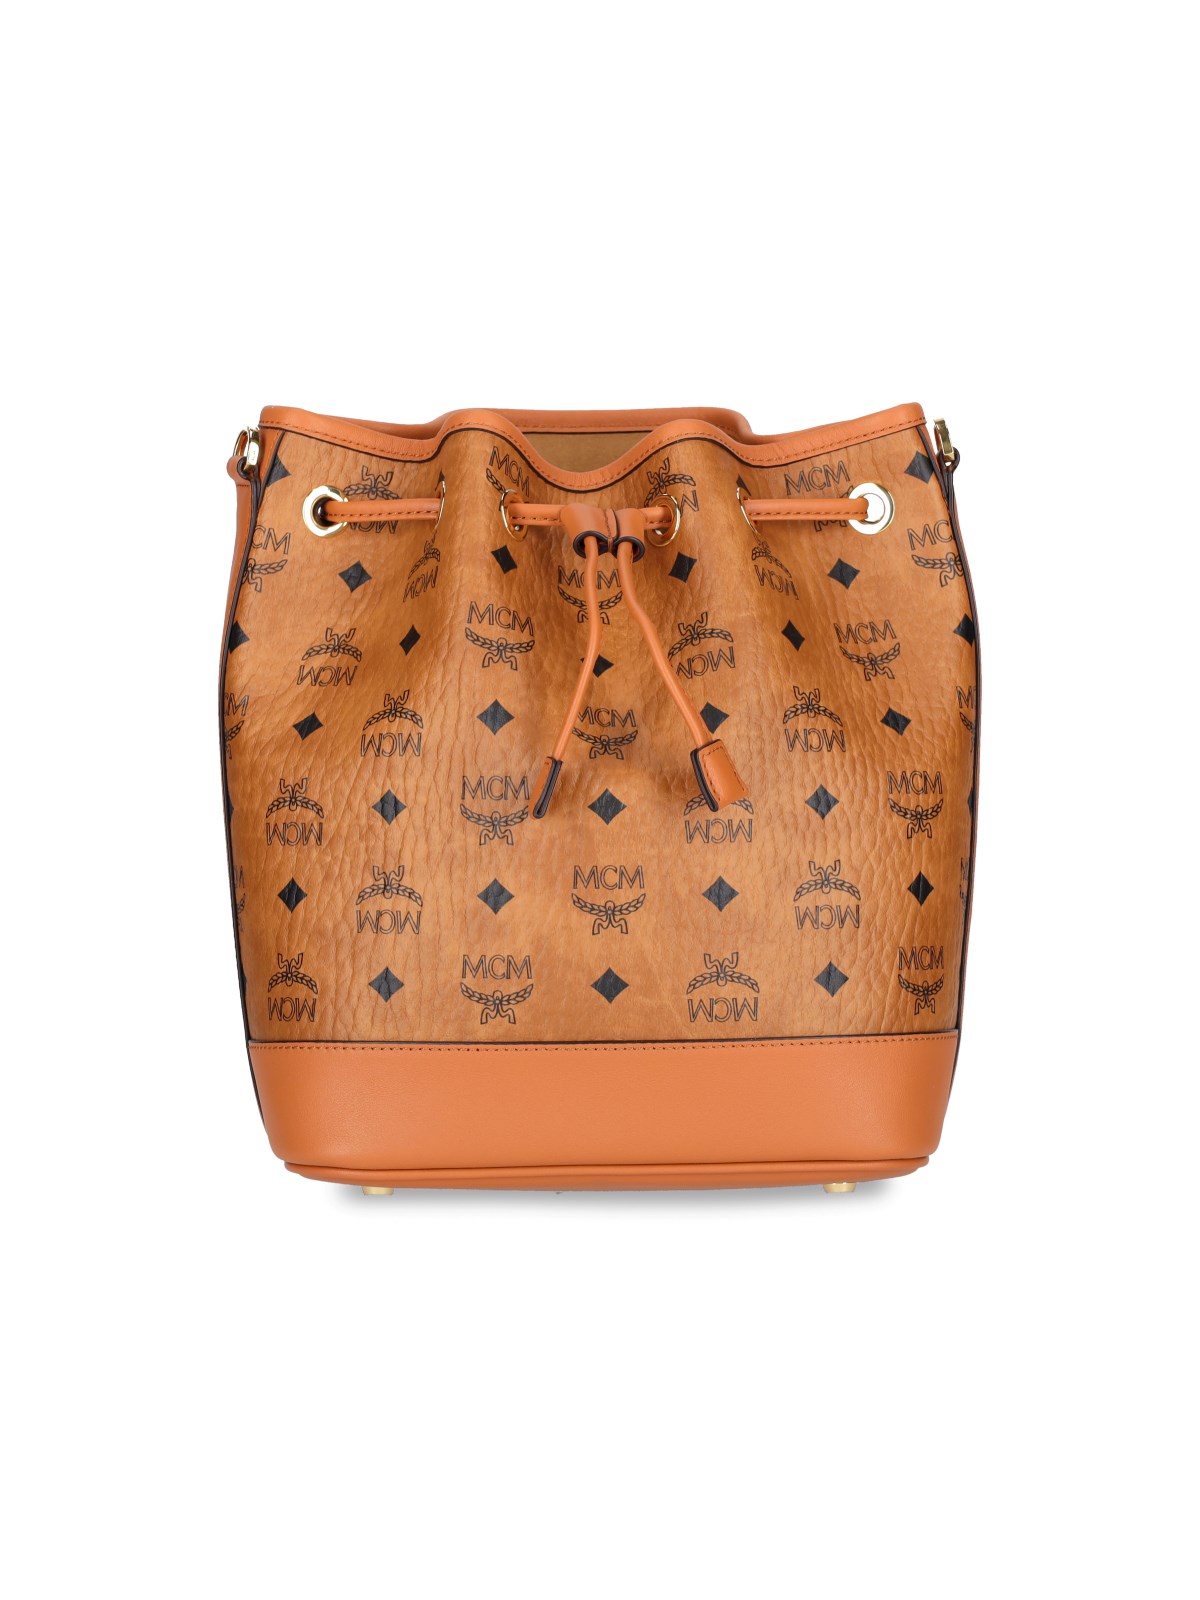 MCM - Bucket bag for Woman - Brown - MWDCSDU02-CO